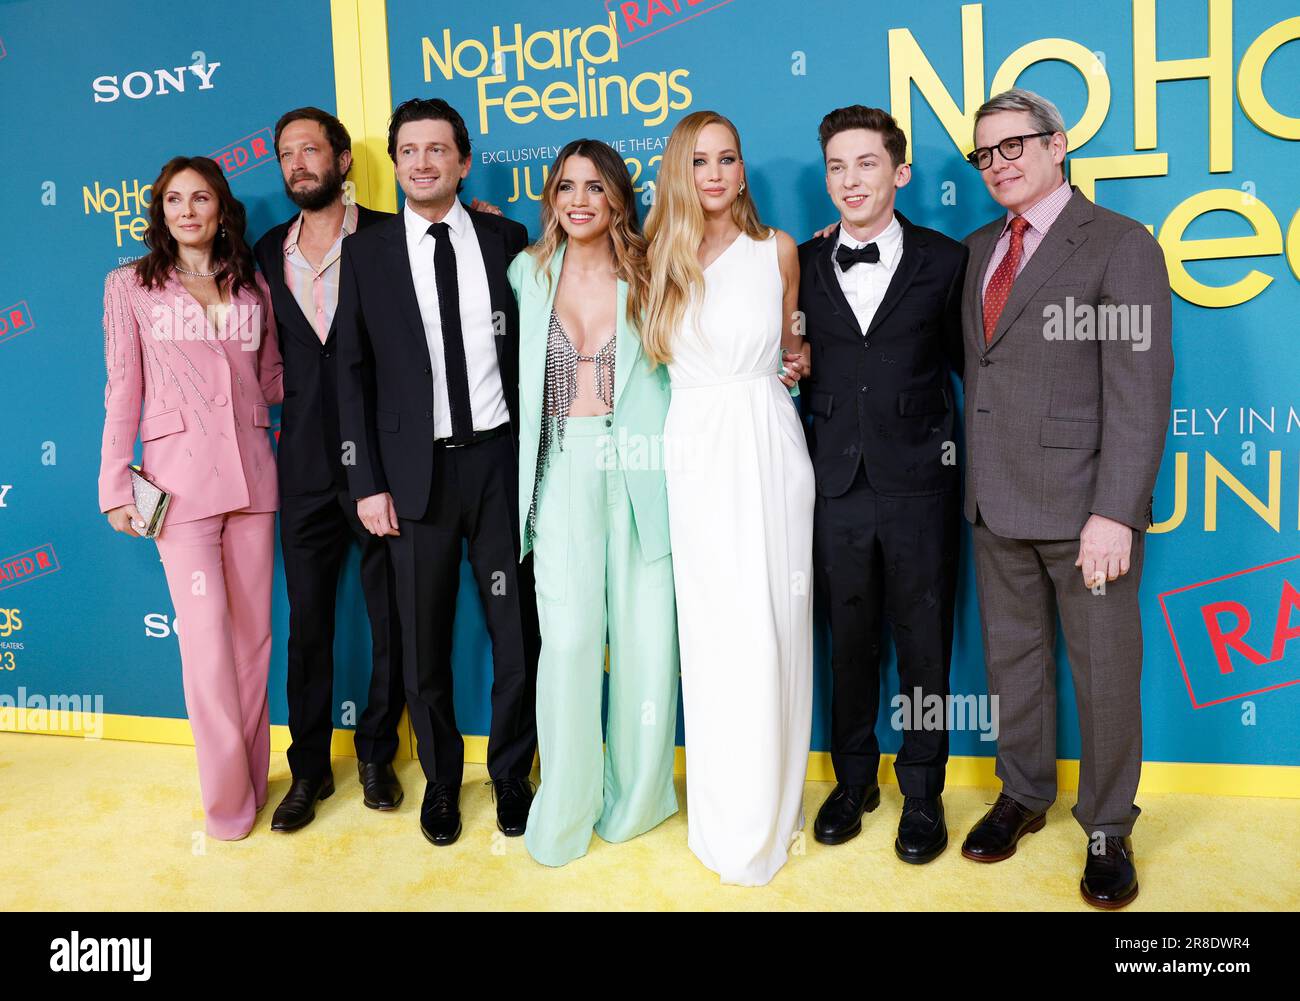 New York, United States. 20th June, 2023. Laura Benanti, Ebon Moss-Bachrach, Gene Stupnitsky, Natalie Morales, Jennifer Lawrence, Andrew Feldman and Matthew Broderick arrive on the red carpet for the Sony Pictures' 'No Hard Feelings' premiere at AMC Lincoln Square Theater on Tuesday, June 20, 2023 in New York City. Photo by John Angelillo/UPI Credit: UPI/Alamy Live News Stock Photo